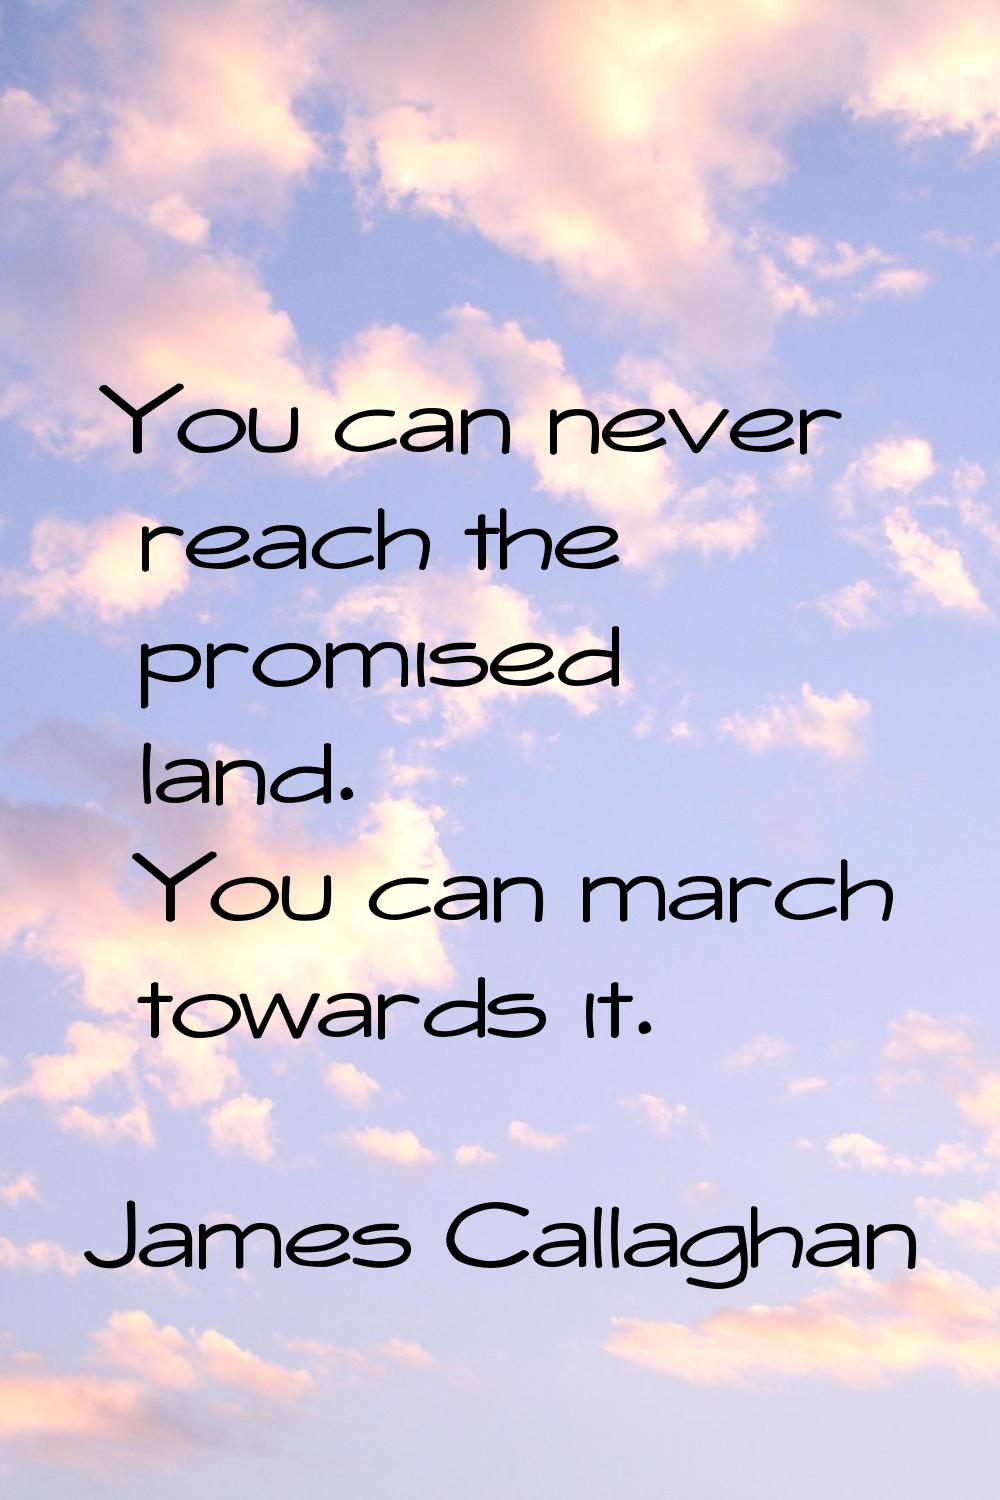 You can never reach the promised land. You can march towards it.